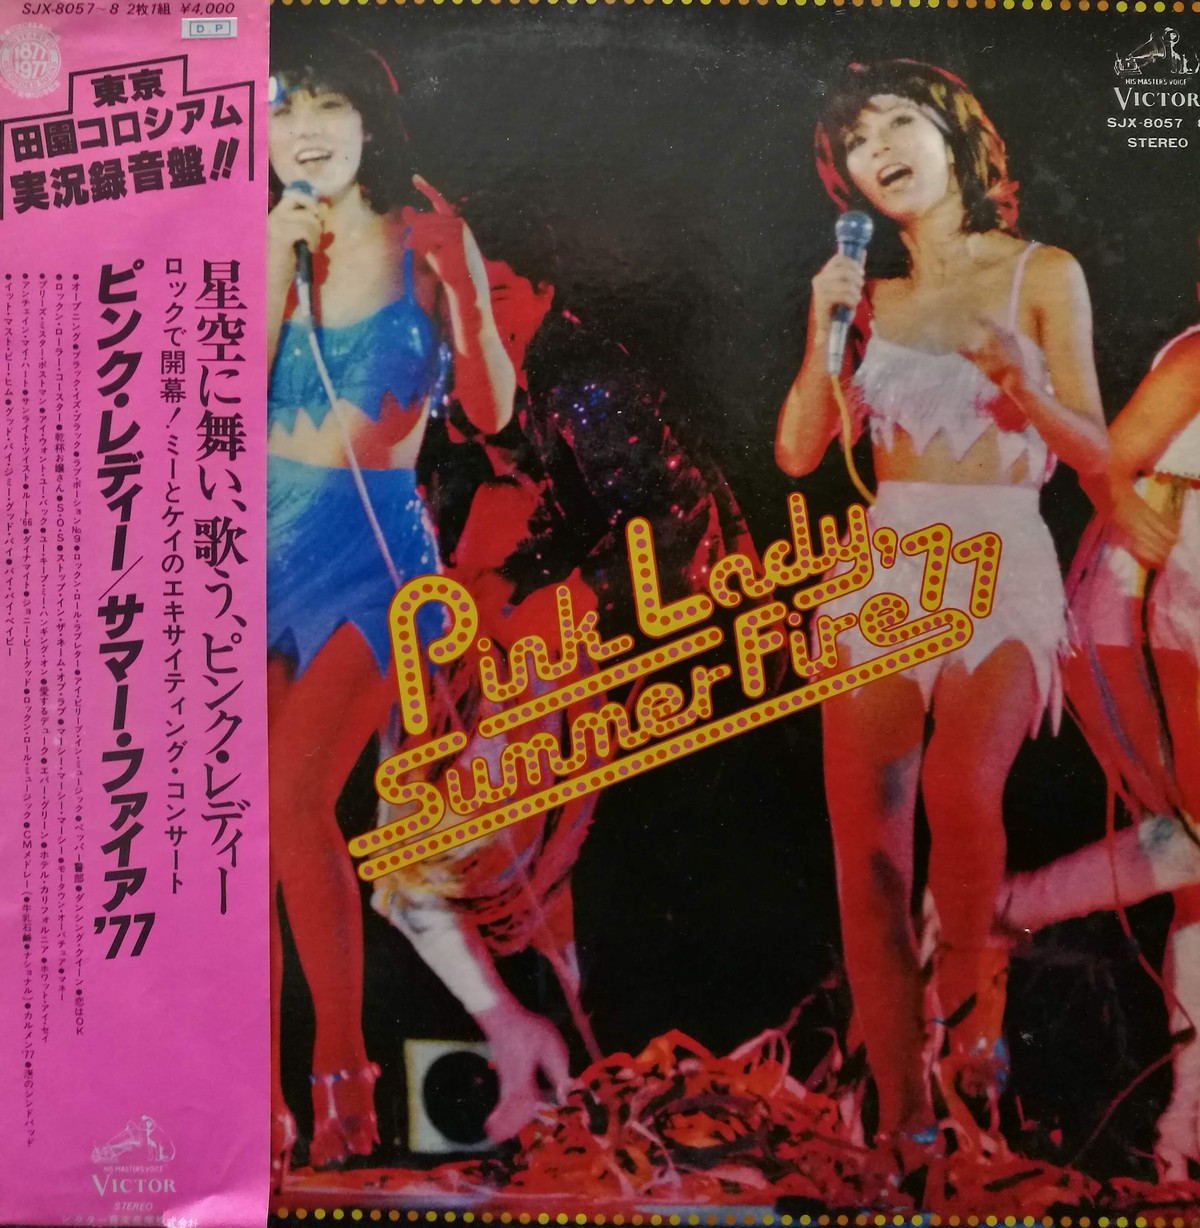 Lp ピンク レディ Pink Lady Summer Fire 77 Compact Disco Asia